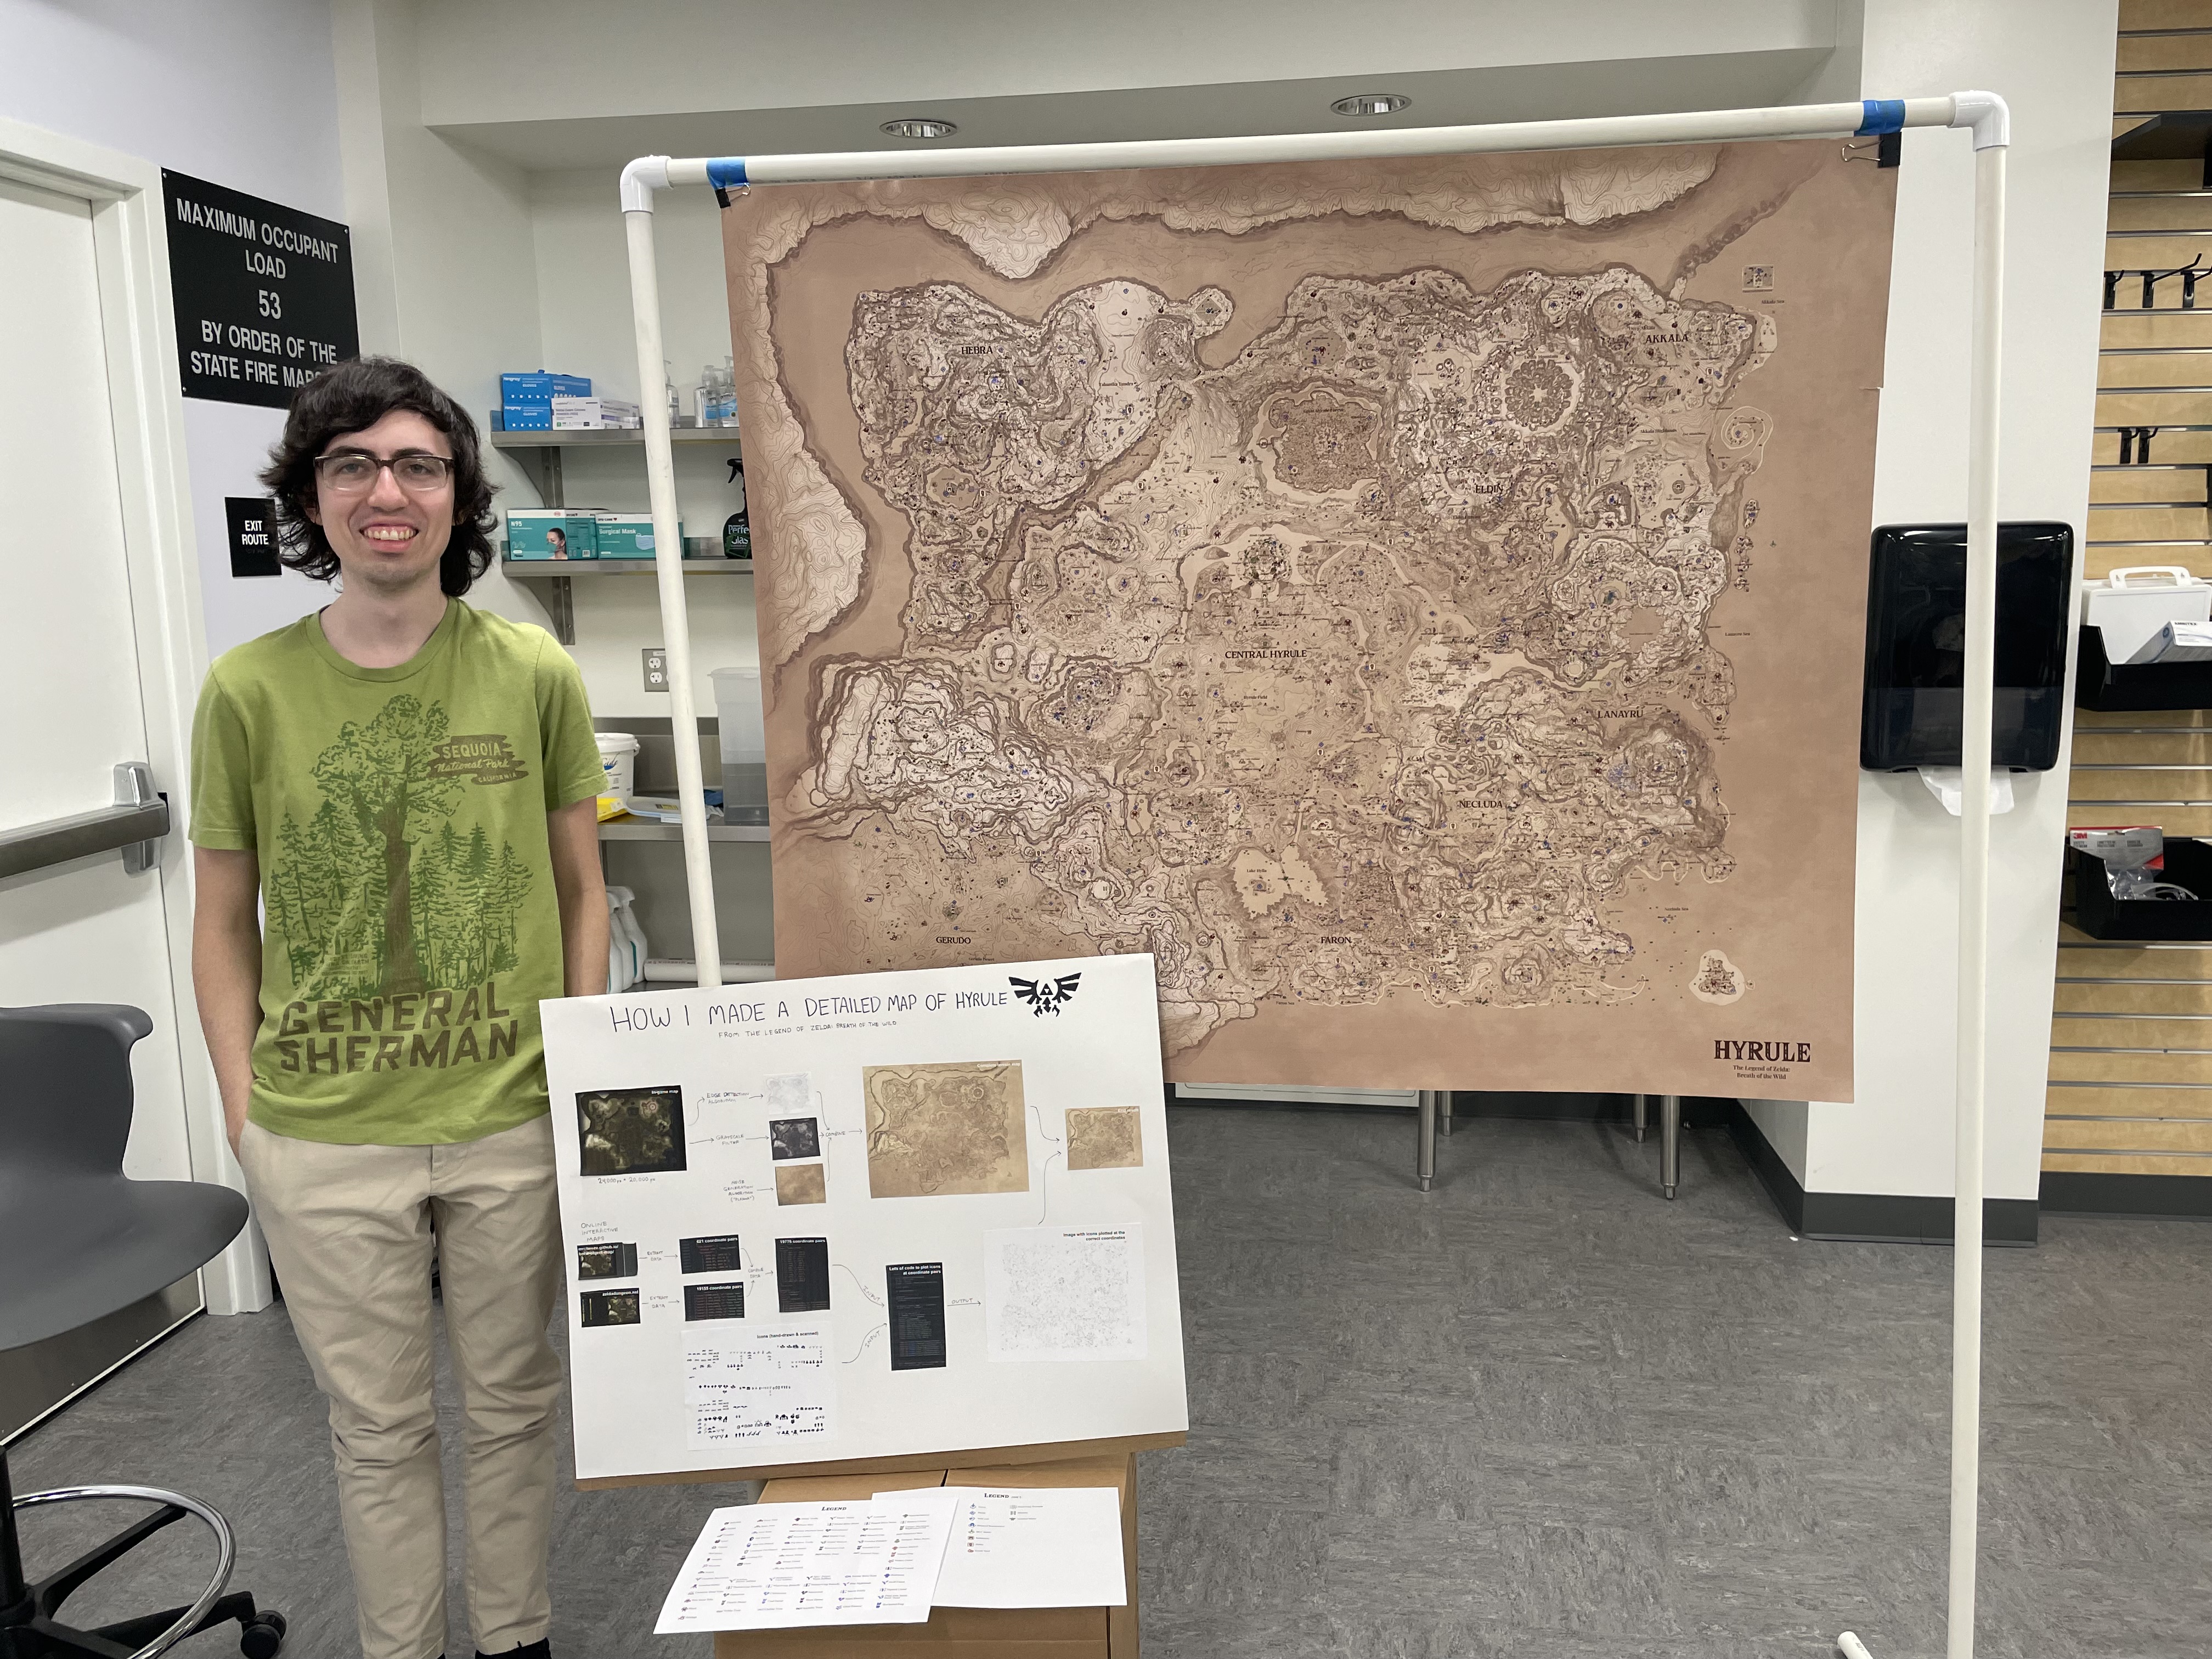 Me in a classroom standing next to my four-foot print of my map of Hyrule, suspended from a PVC pipe frame, and a flowchart showing the process of making the map